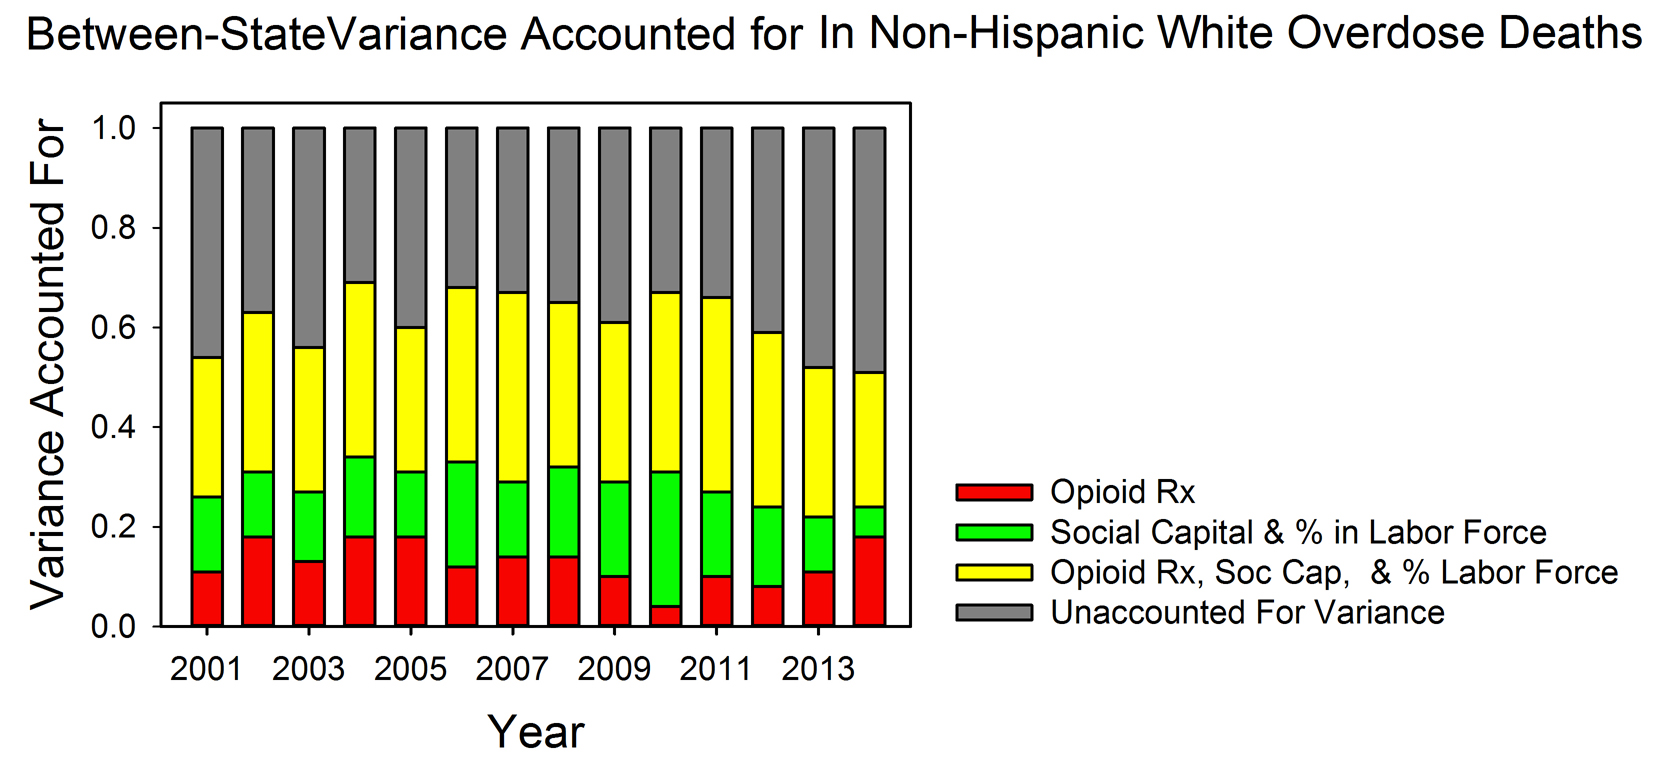 Atlas of Science. Social-economic factors predict state differences in opioid overdose rates